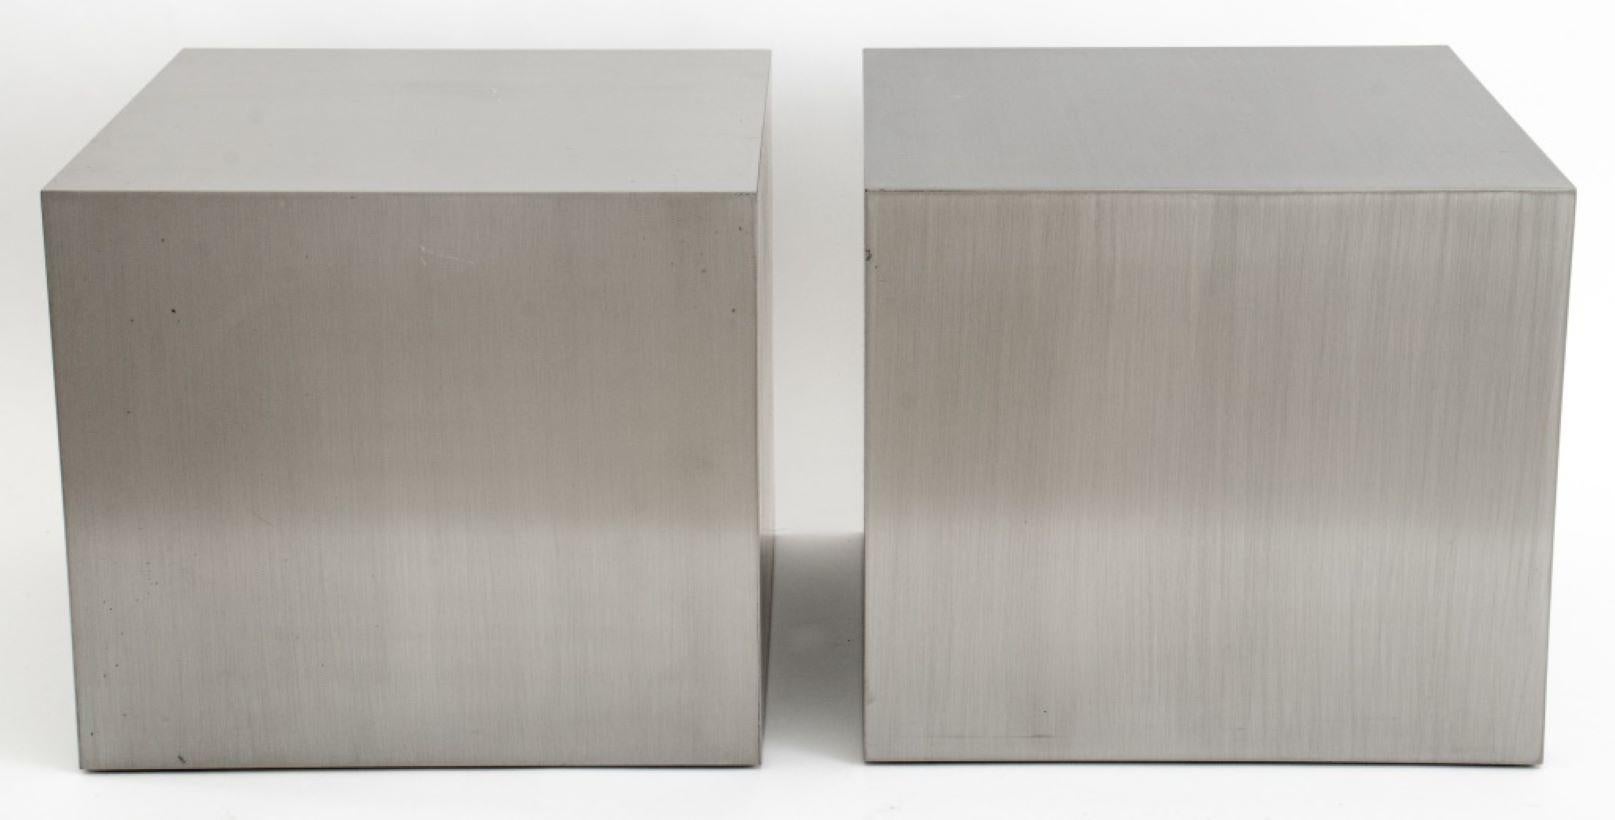 Pair of Maria Pergay (French, born Moldova, b. 1930) Stainless Steel Cube Tables, circa 1970s, labels to undersides.

Dealer: S138XX